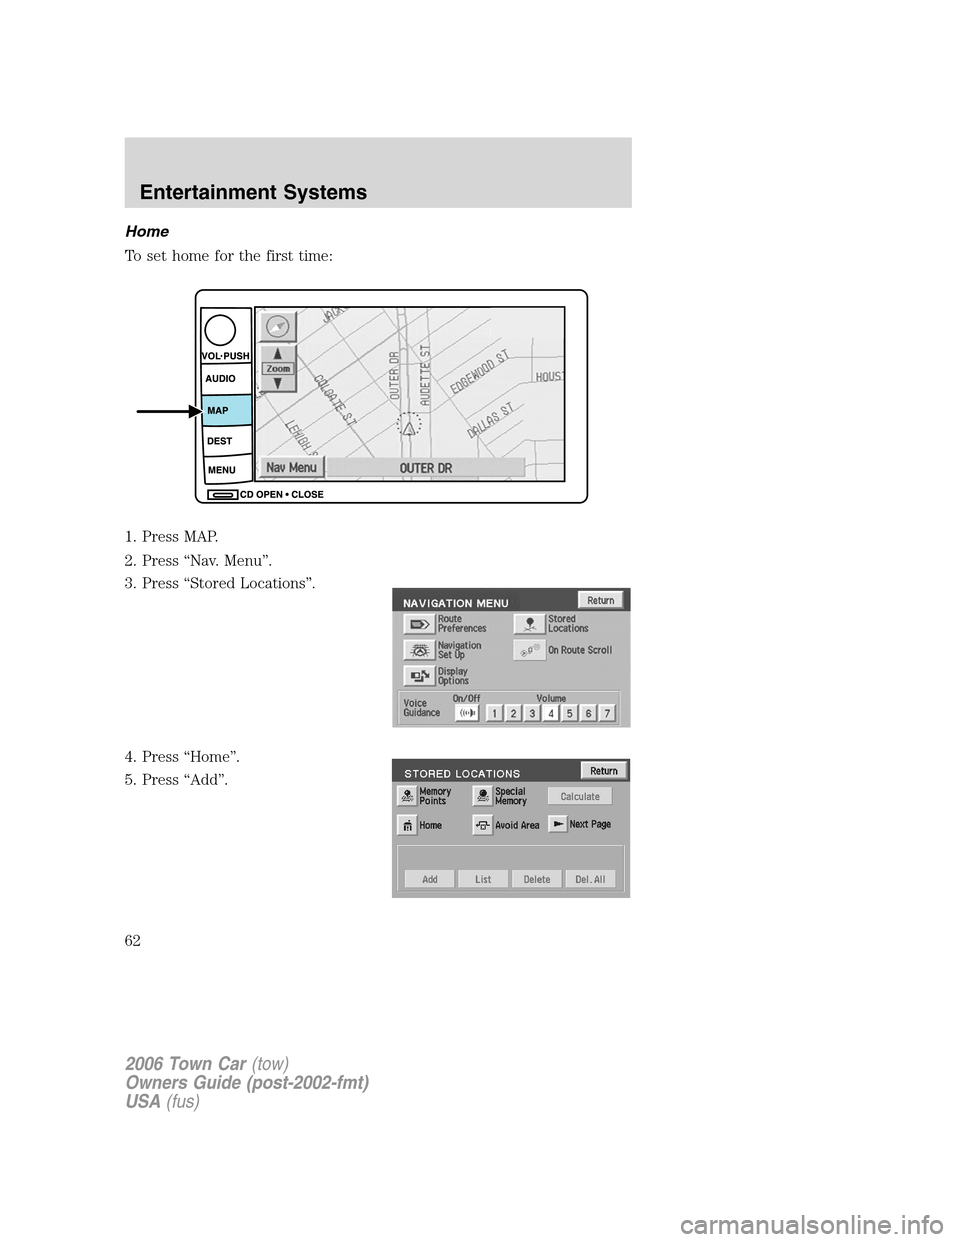 LINCOLN TOWN CAR 2006 Repair Manual Home
To set home for the first time:
1. Press MAP.
2. Press “Nav. Menu”.
3. Press “Stored Locations”.
4. Press “Home”.
5. Press “Add”.
2006 Town Car(tow)
Owners Guide (post-2002-fmt)
U